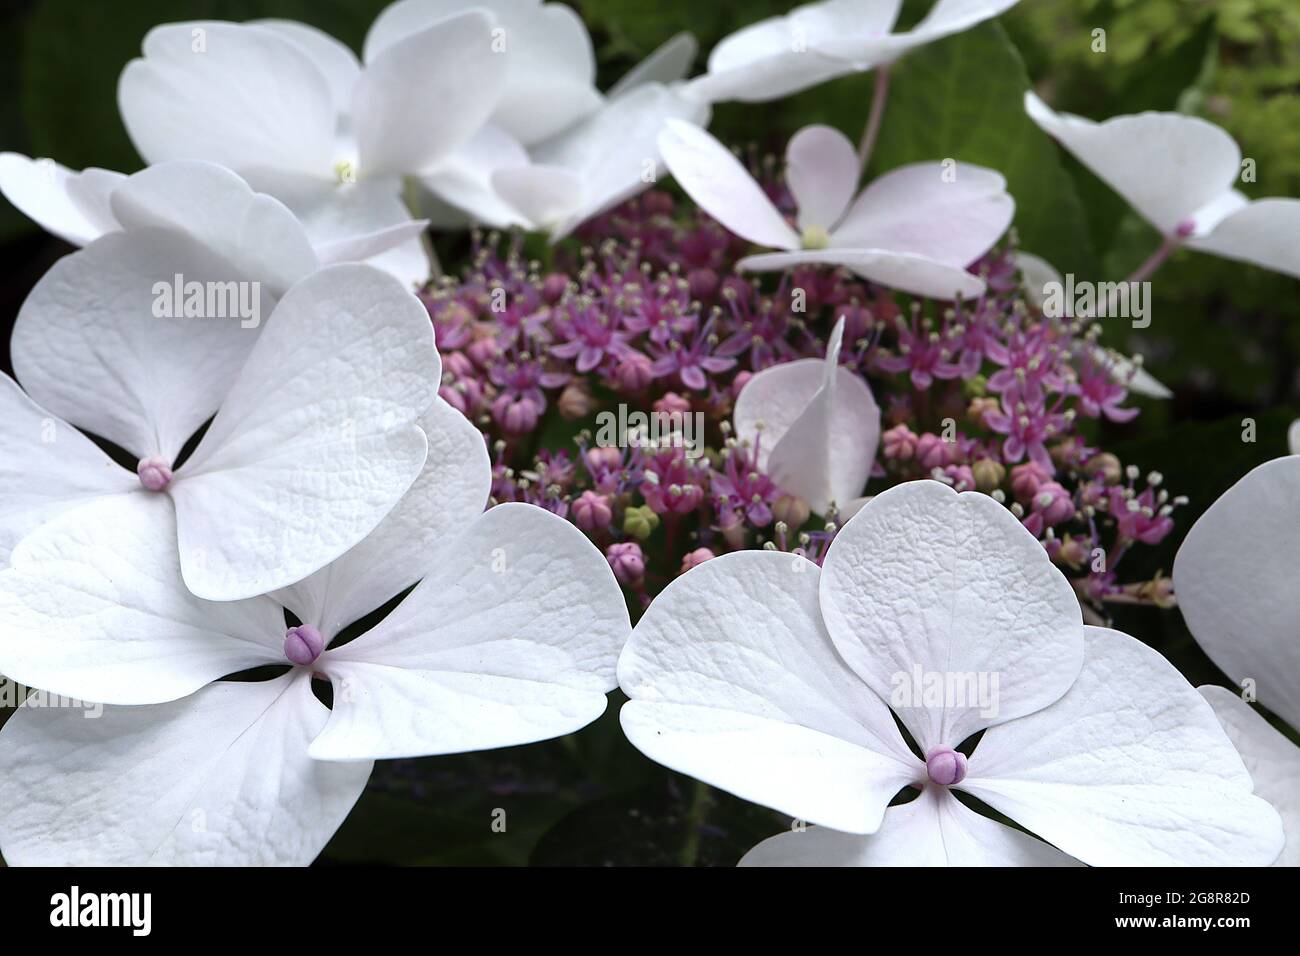 Hydrangea macrophylla ‘Teller White’  Hortensia Teller White – lacecap type with white florets and tiny purple flower clusters,  May, England, UK Stock Photo